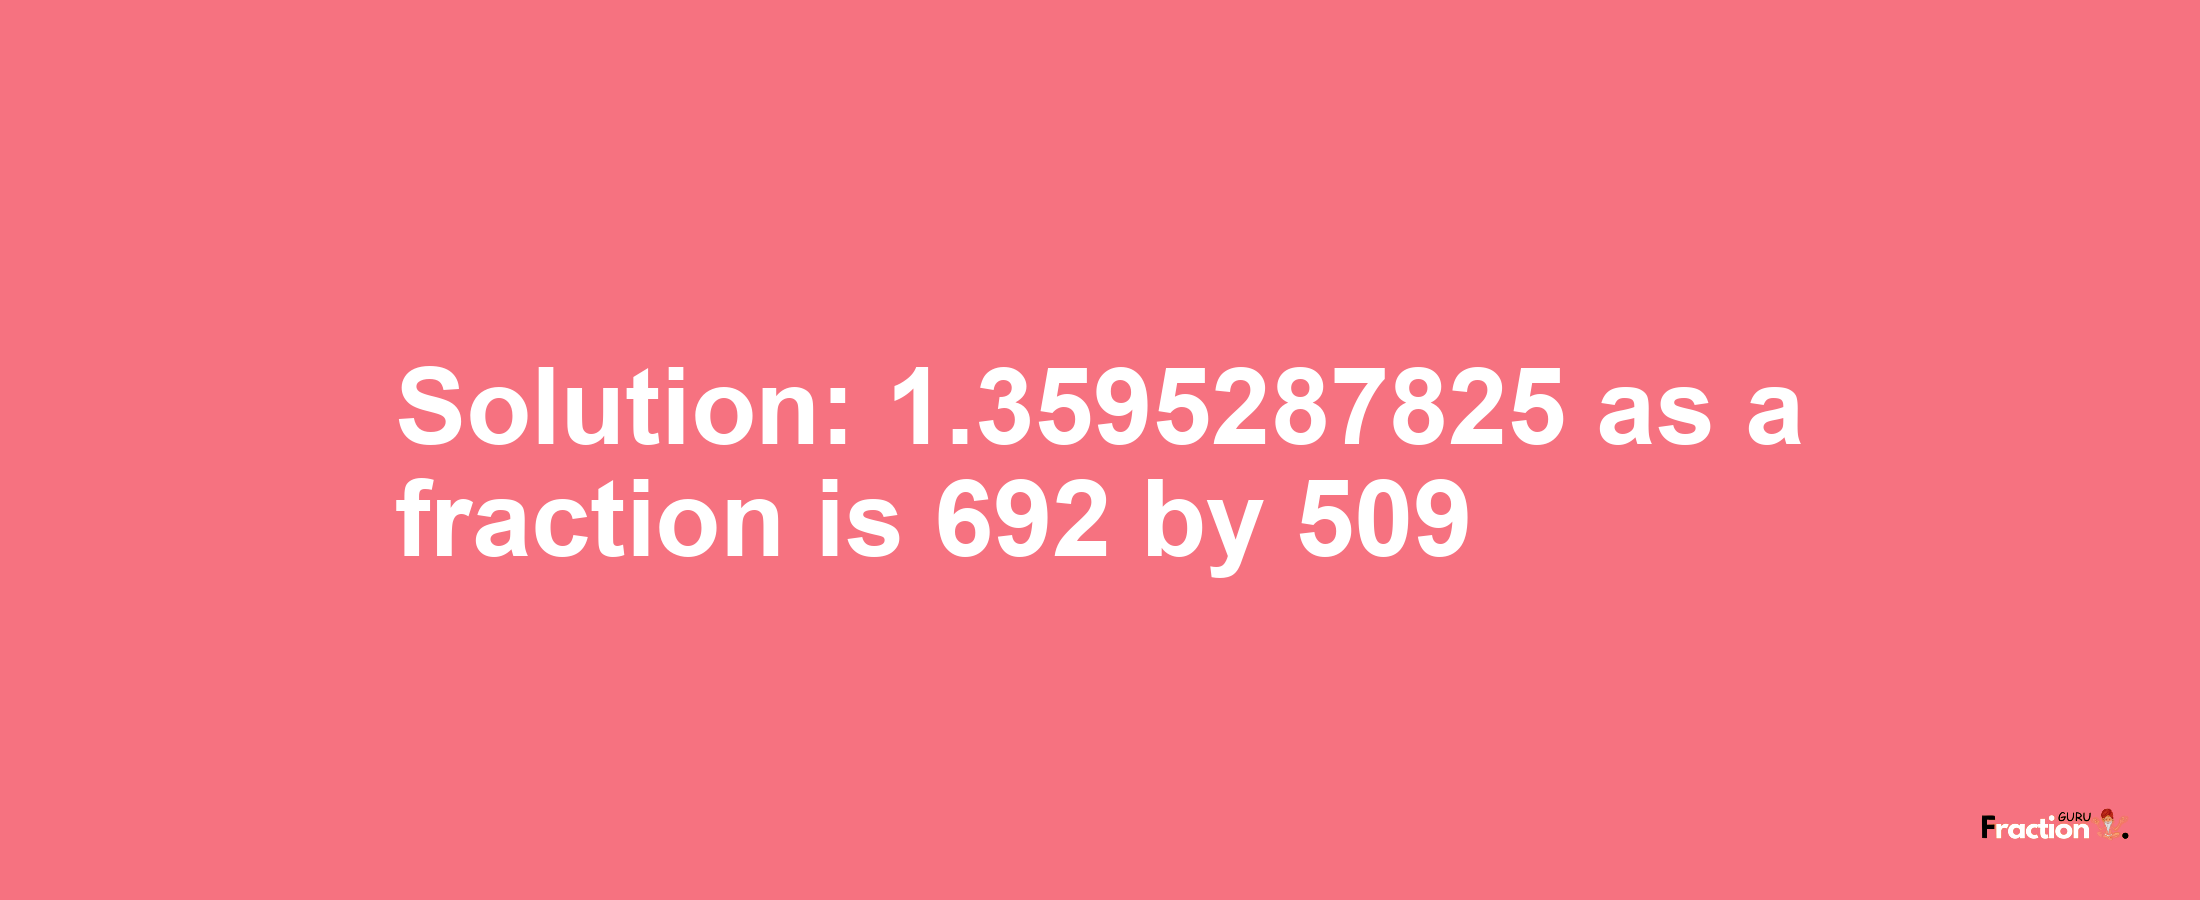 Solution:1.3595287825 as a fraction is 692/509